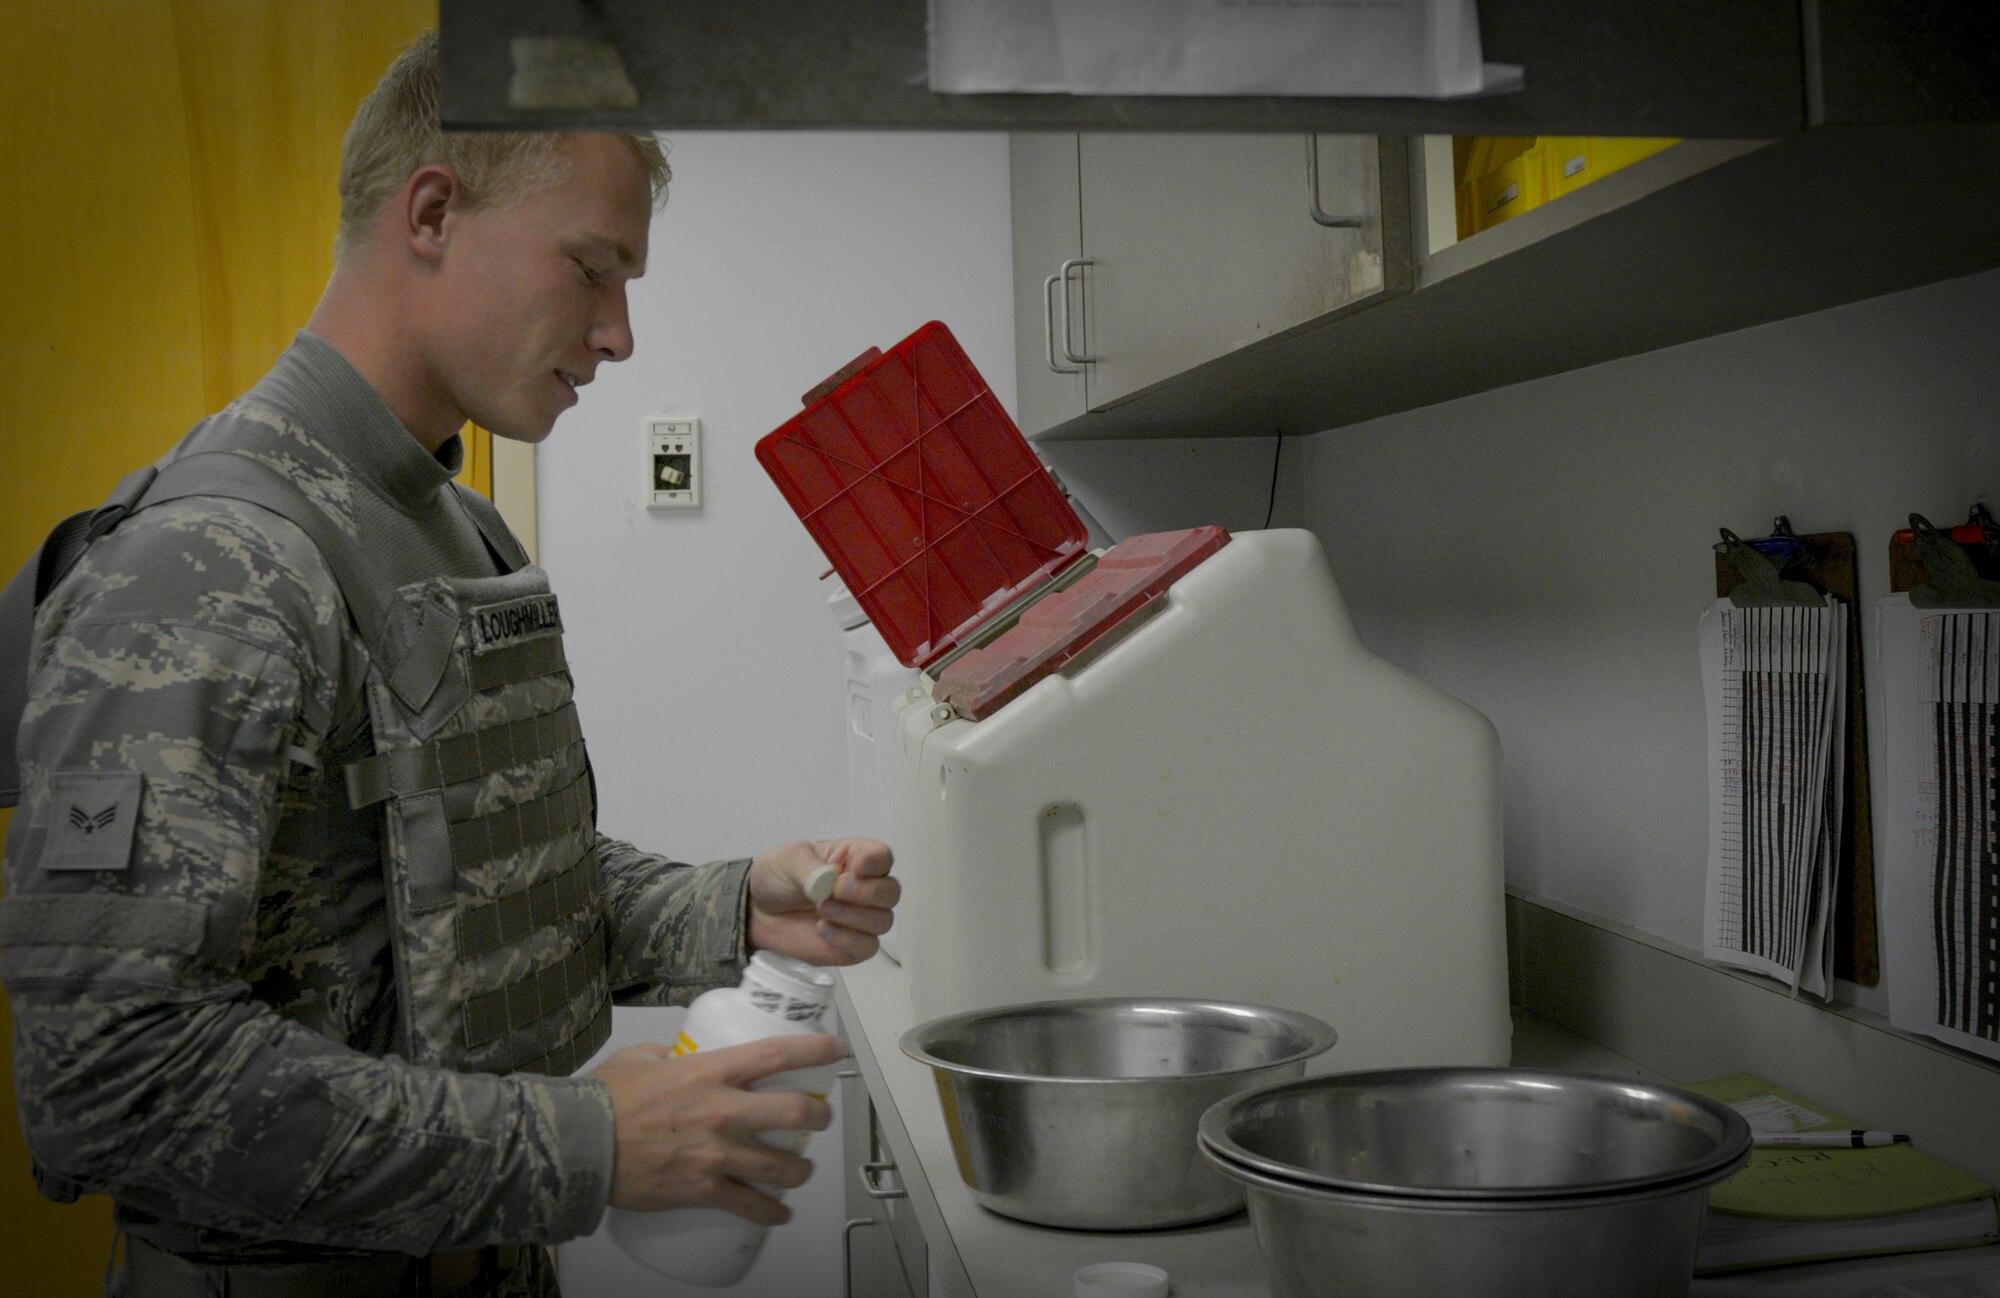 U.S. Air Force Senior Airman Brian Loughmiller, a military working dog handler assigned to the 6th Security Forces Squadron, dispenses medication into a dog’s food bowl at MacDill Air Force Base, Fla., Aug. 15, 2017. Handlers are responsible for keeping the kennels clean, the dogs fed and dispensing necessary medication. (U.S. Air Force photo by Senior Airman Mariette Adams)